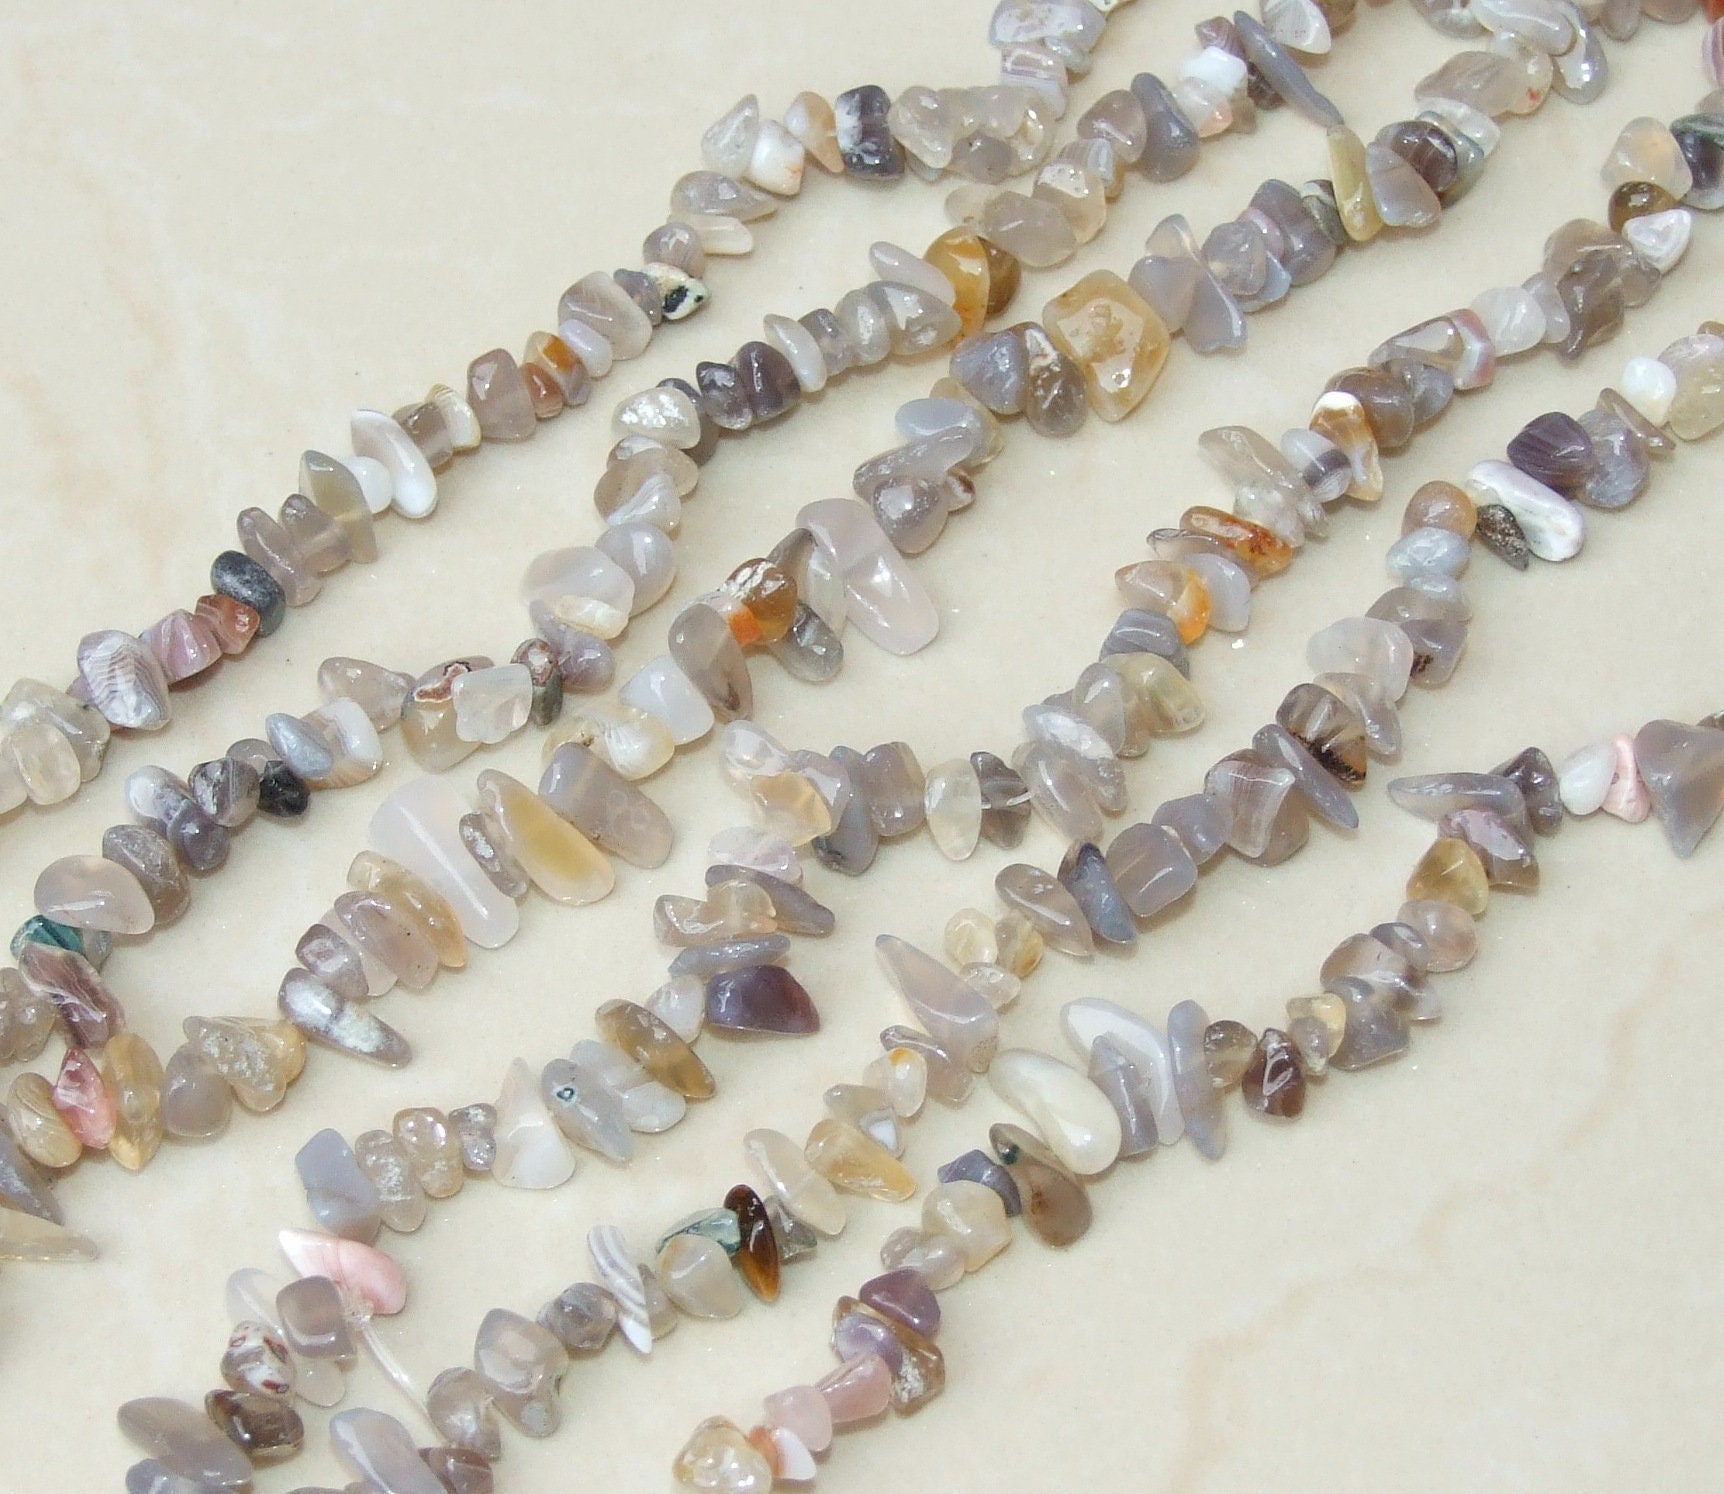 Small Agate Chips, Polished Agate, Agate Beads, Gemstone Beads, Jewelry Stones, Natural Agate, 31.5" Strand,  4mm - 10mm